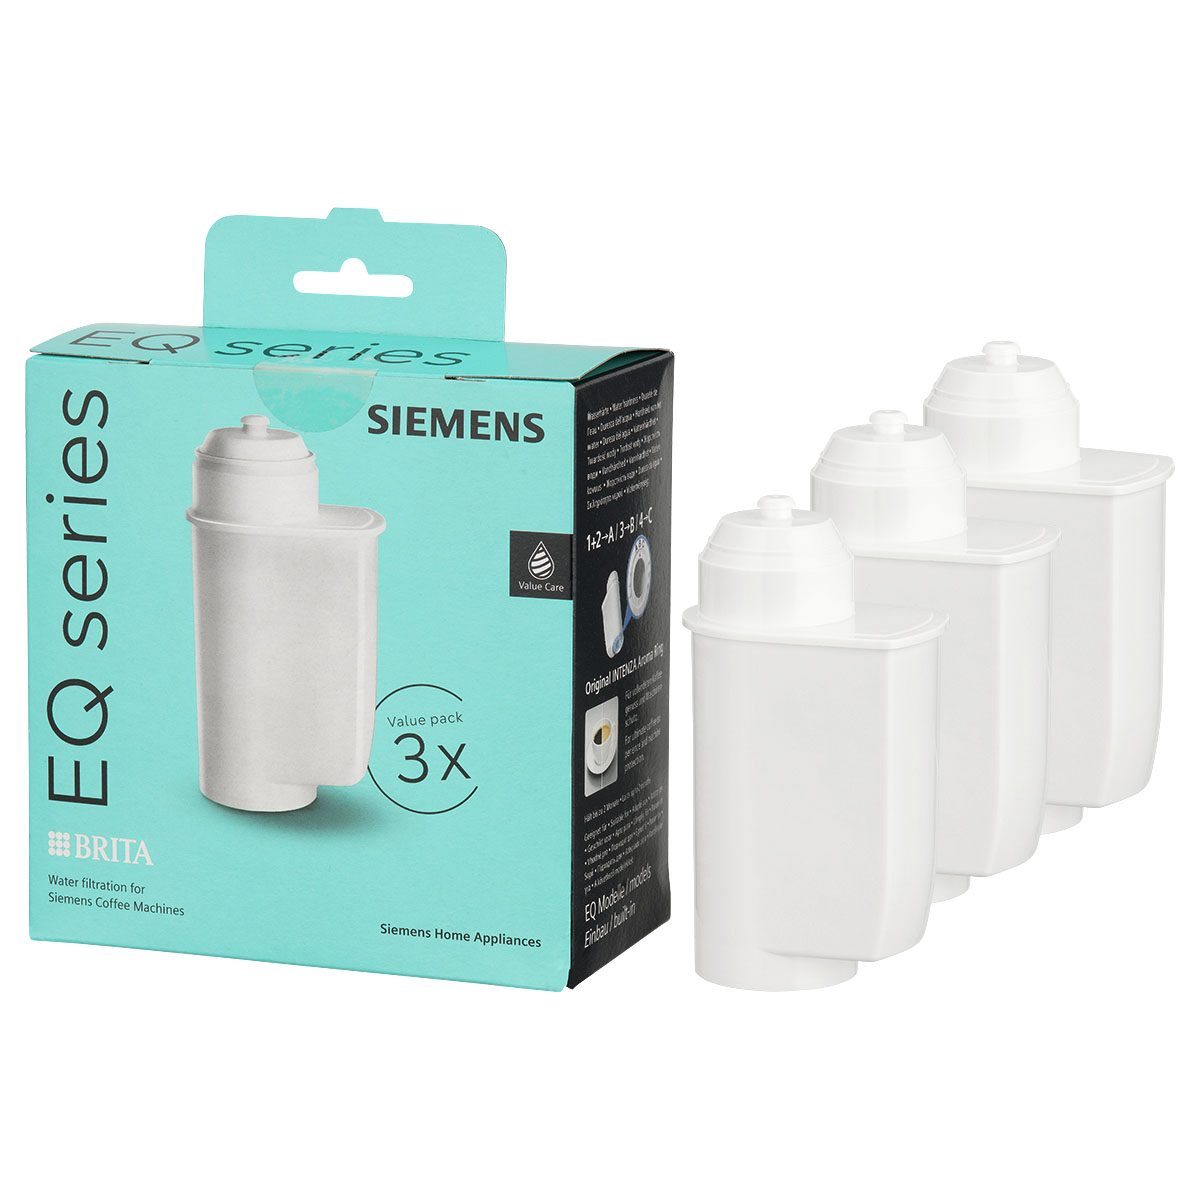 Siemens Water filter Intenza TZ70003 - only £8.50 with